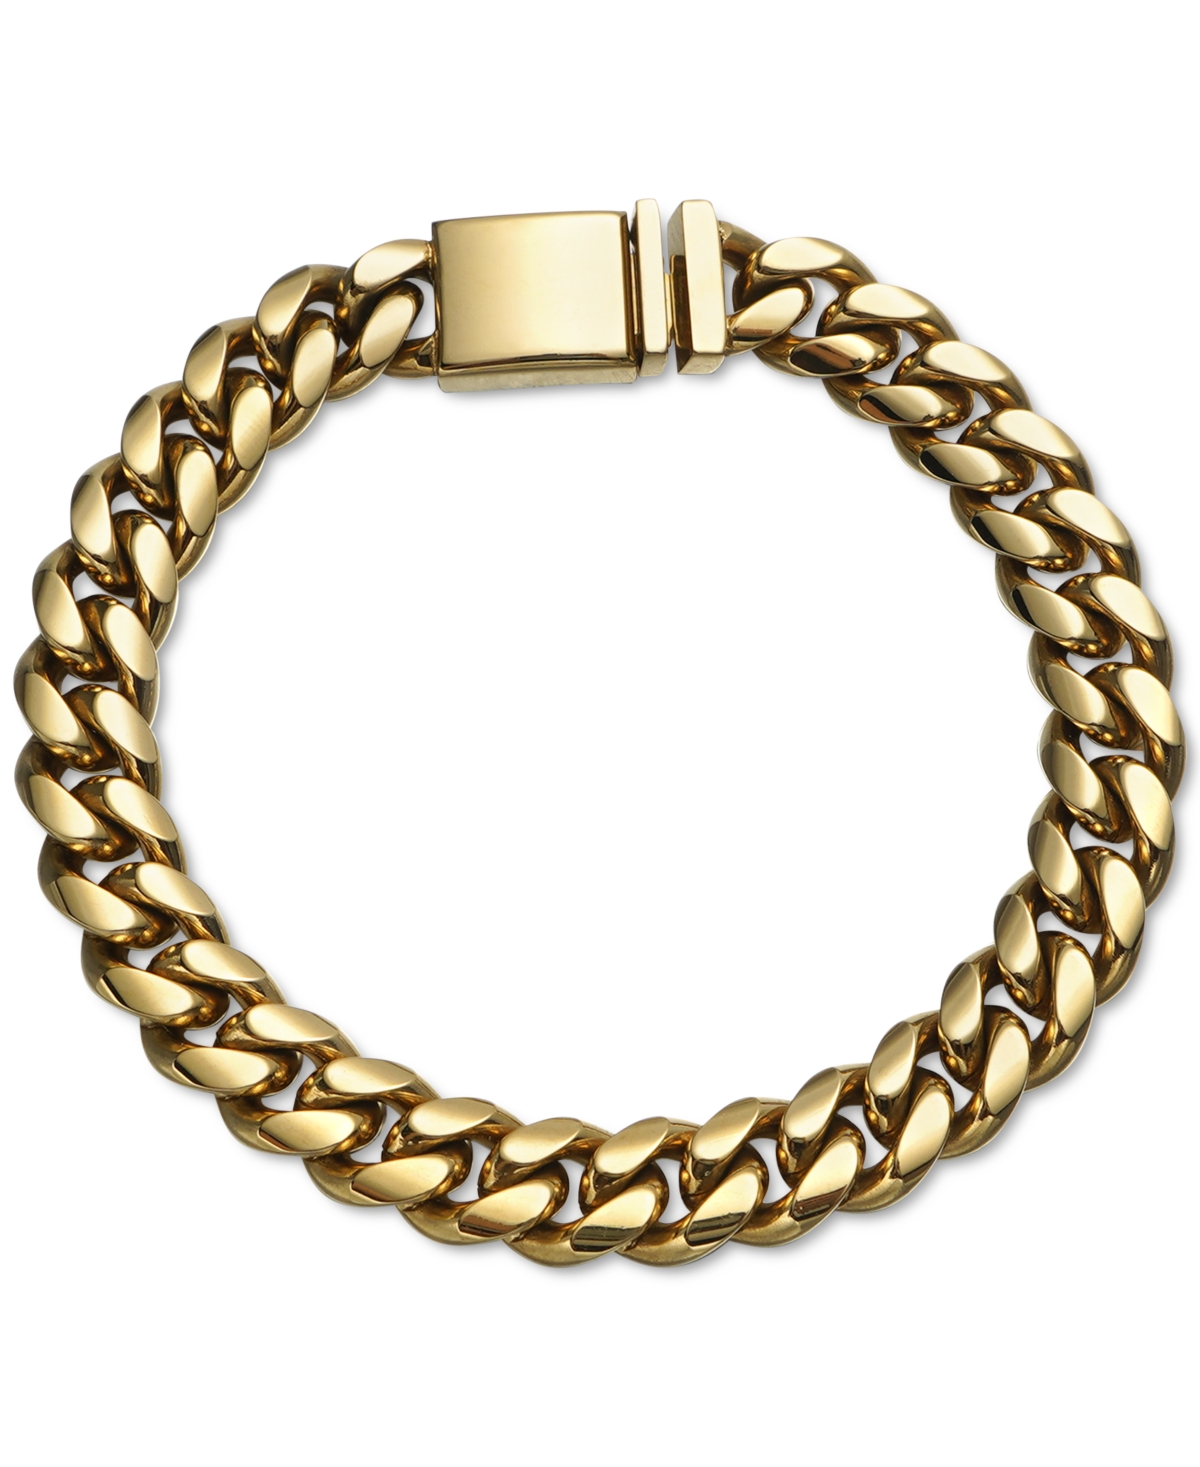 Cuban Link Bracelet in Gold-Tone Ion-Plated Stainless Steel, Created for Macy's - Stainless Steel